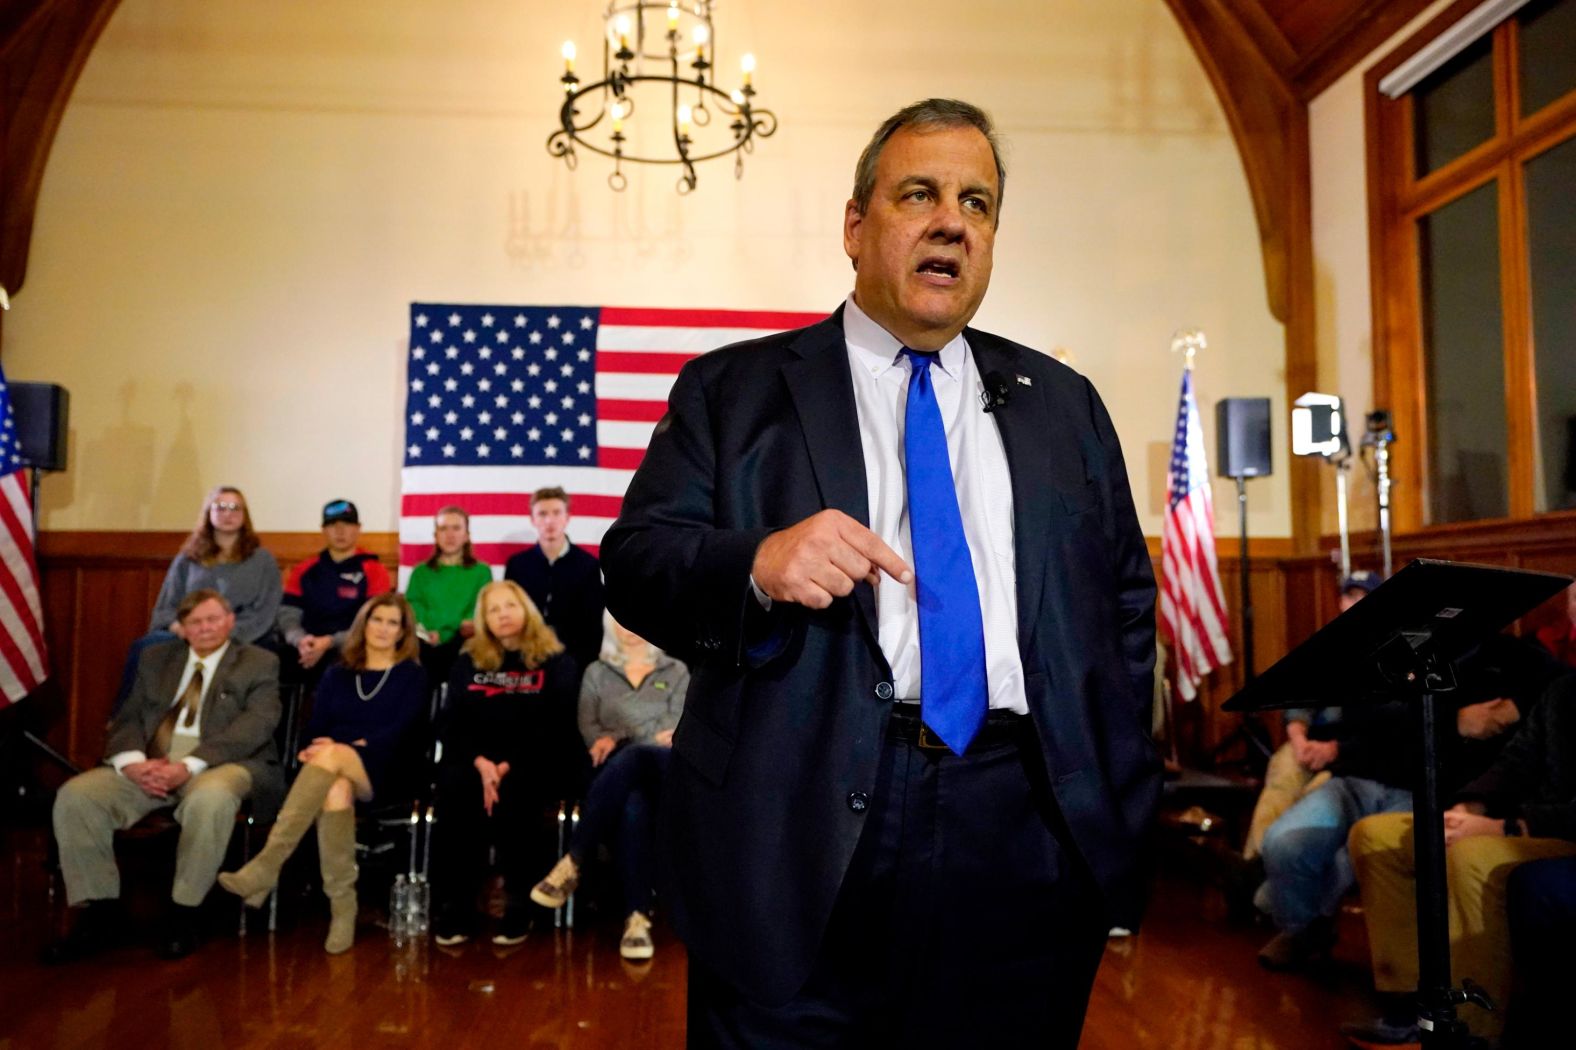 Christie announces he is dropping out of the presidential race during a town-hall event in Windham, New Hampshire, in January 2024.